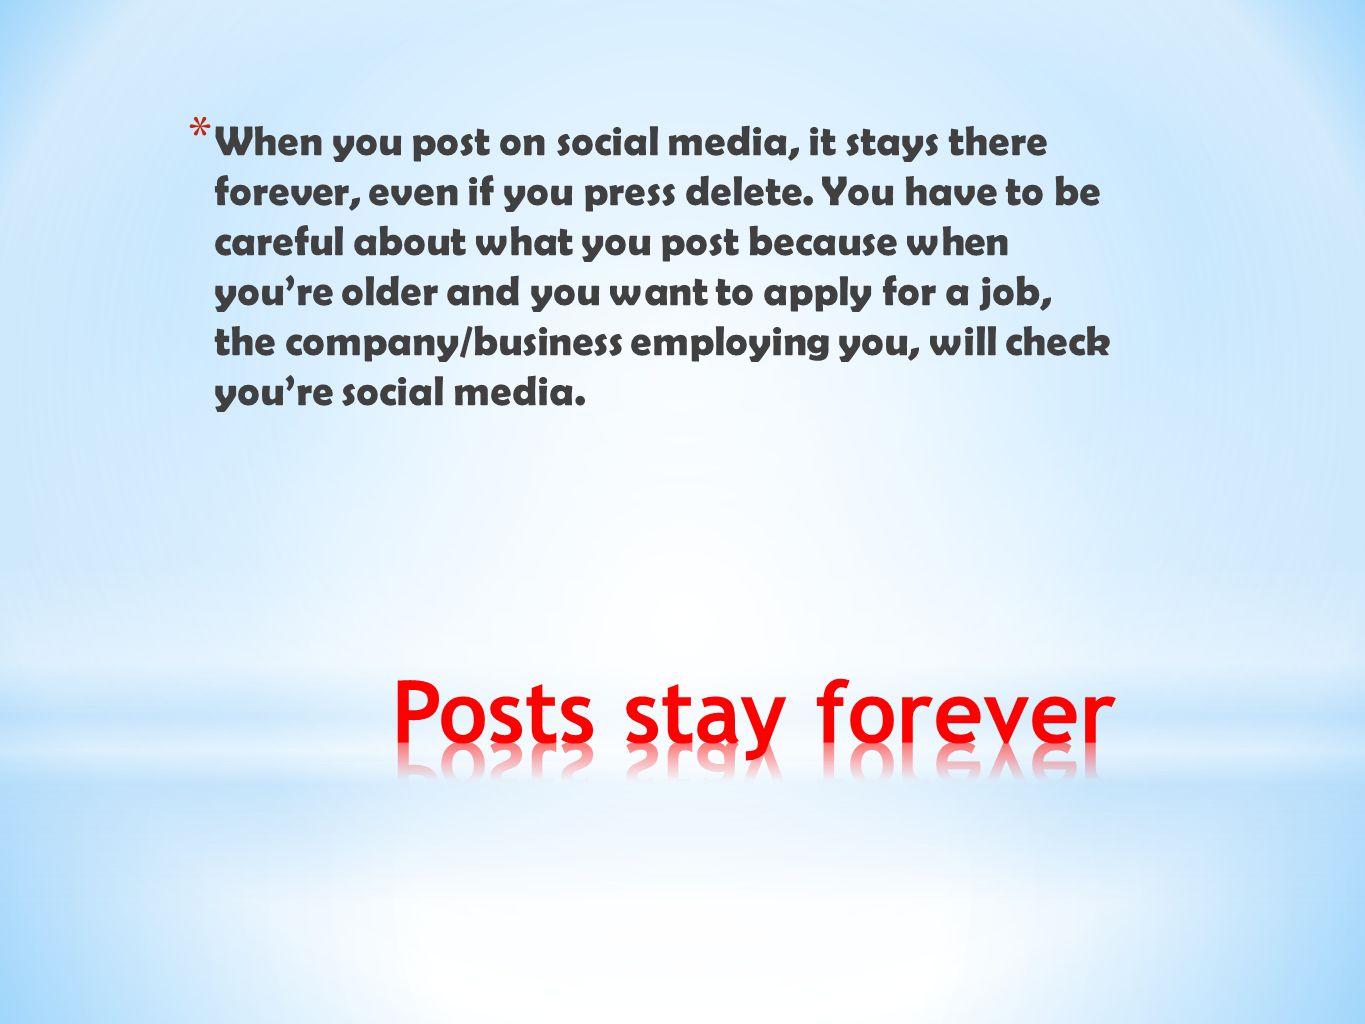 When you post on social media, it stays there forever, even if you press delete. You have to be careful about what you post because when you’re older and you want to apply for a job, the company/business employing you, will check you’re social media.